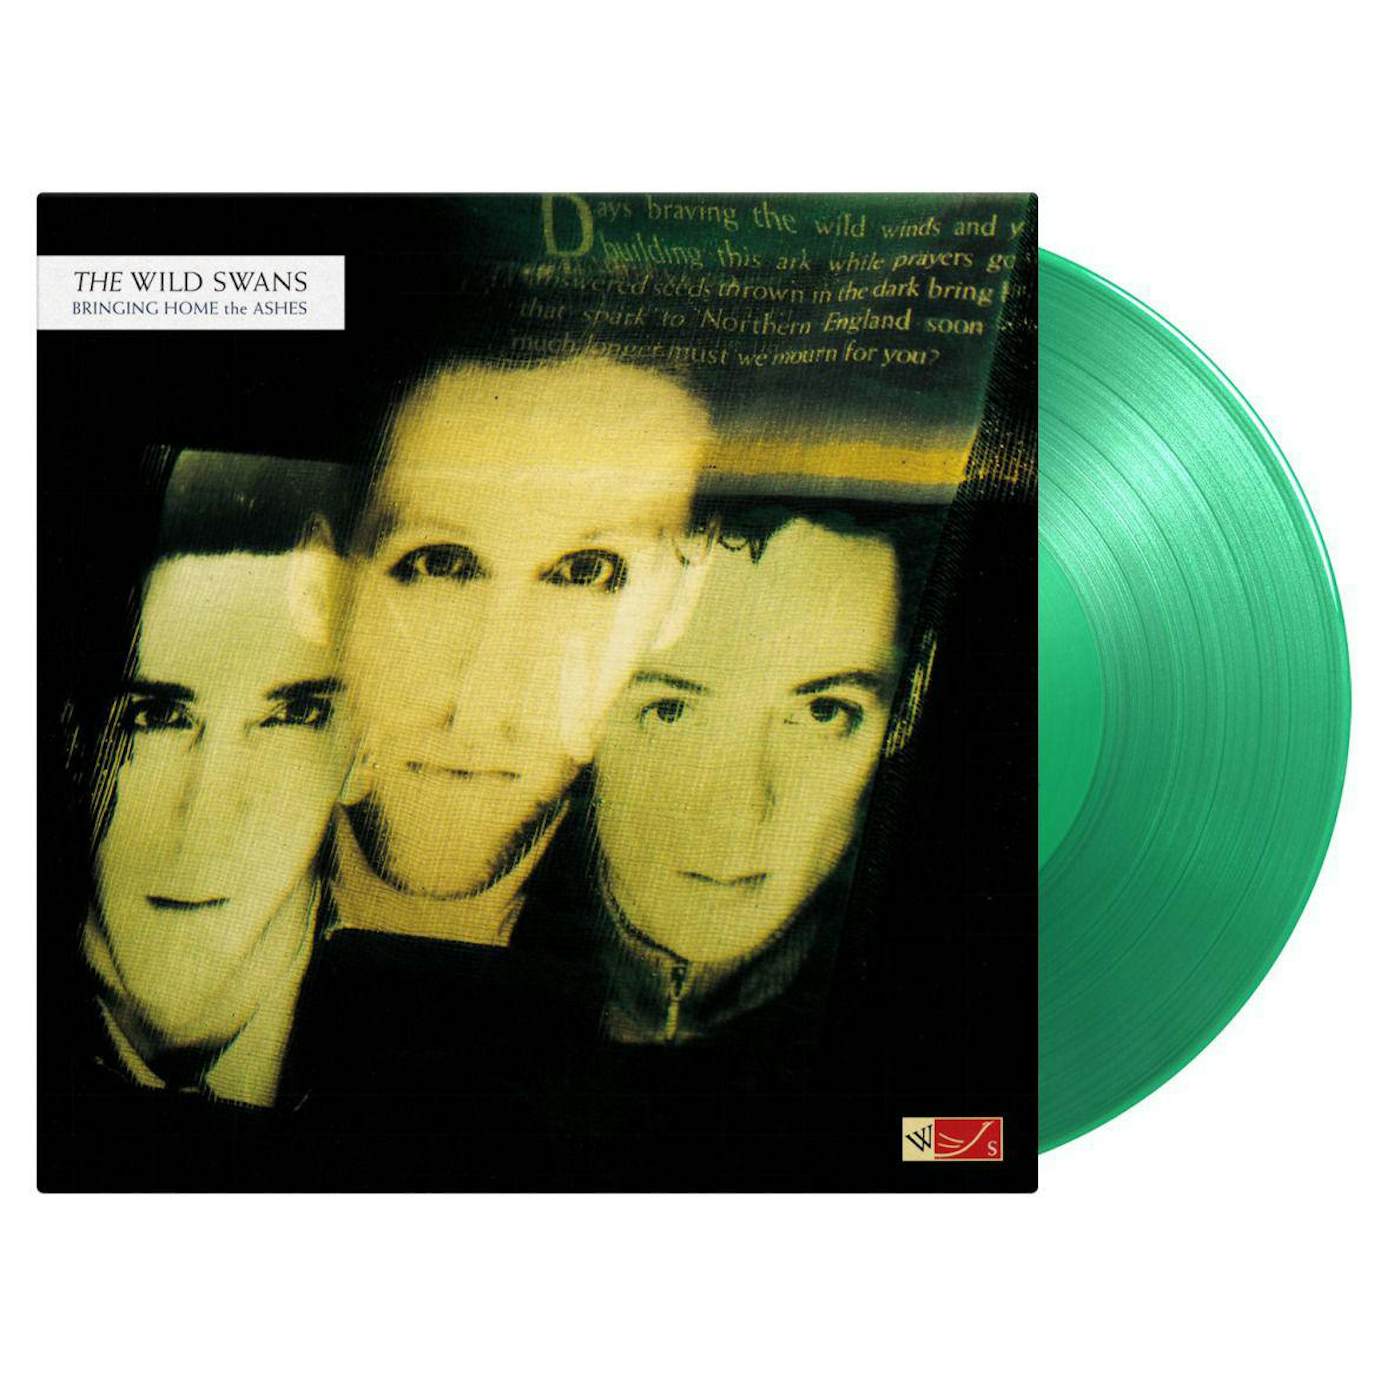 The Wild Swans Bringing Home The Ashes (180g/translucent Green Vinyl Record)